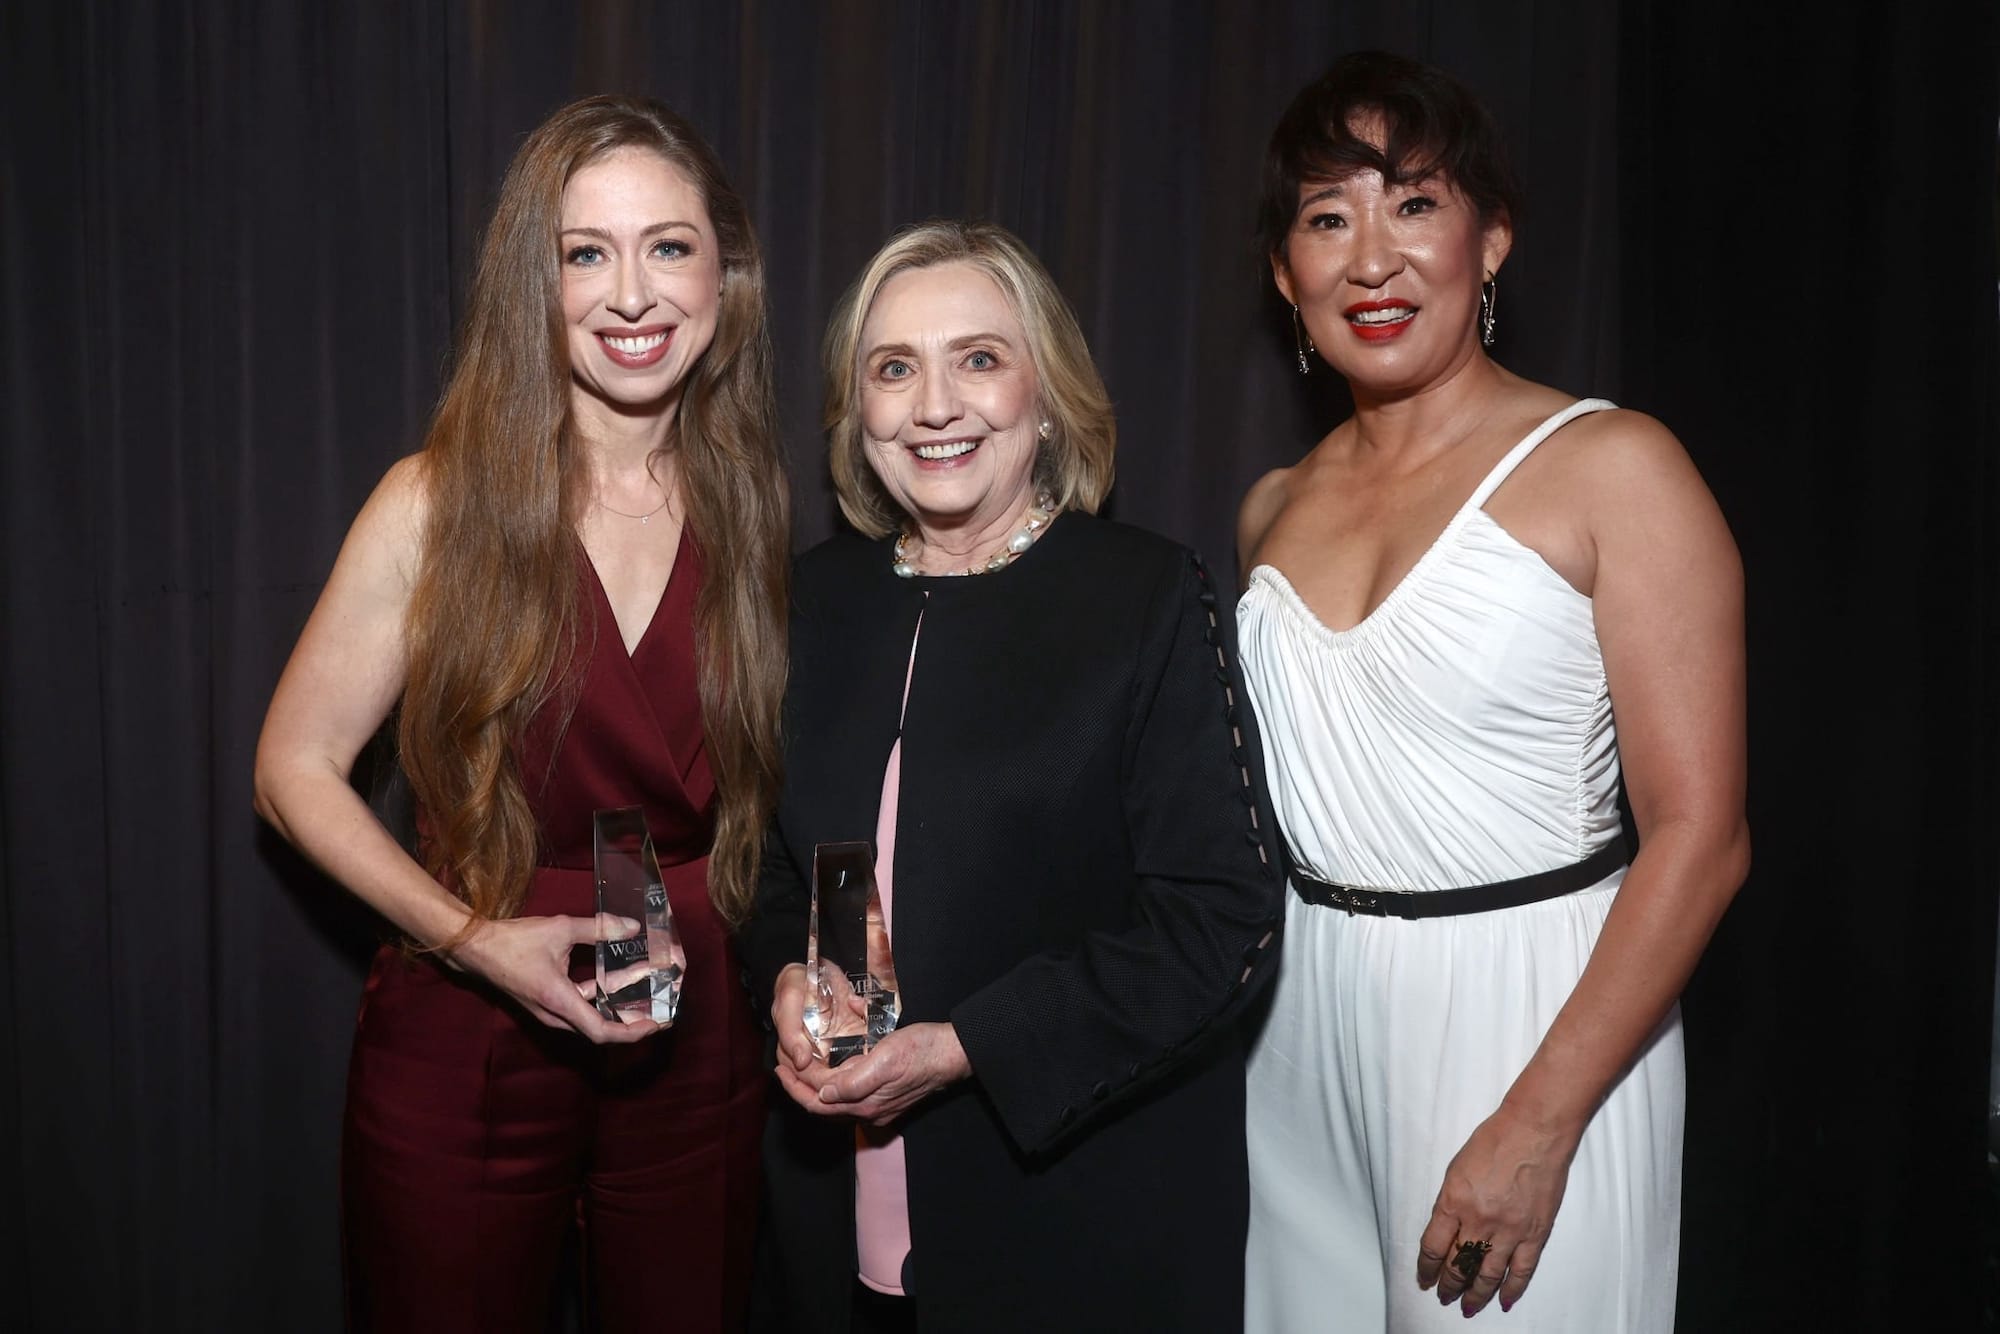 Sandra Oh With Hillary Clinton and her daughter Chelsea Clinton backstage.